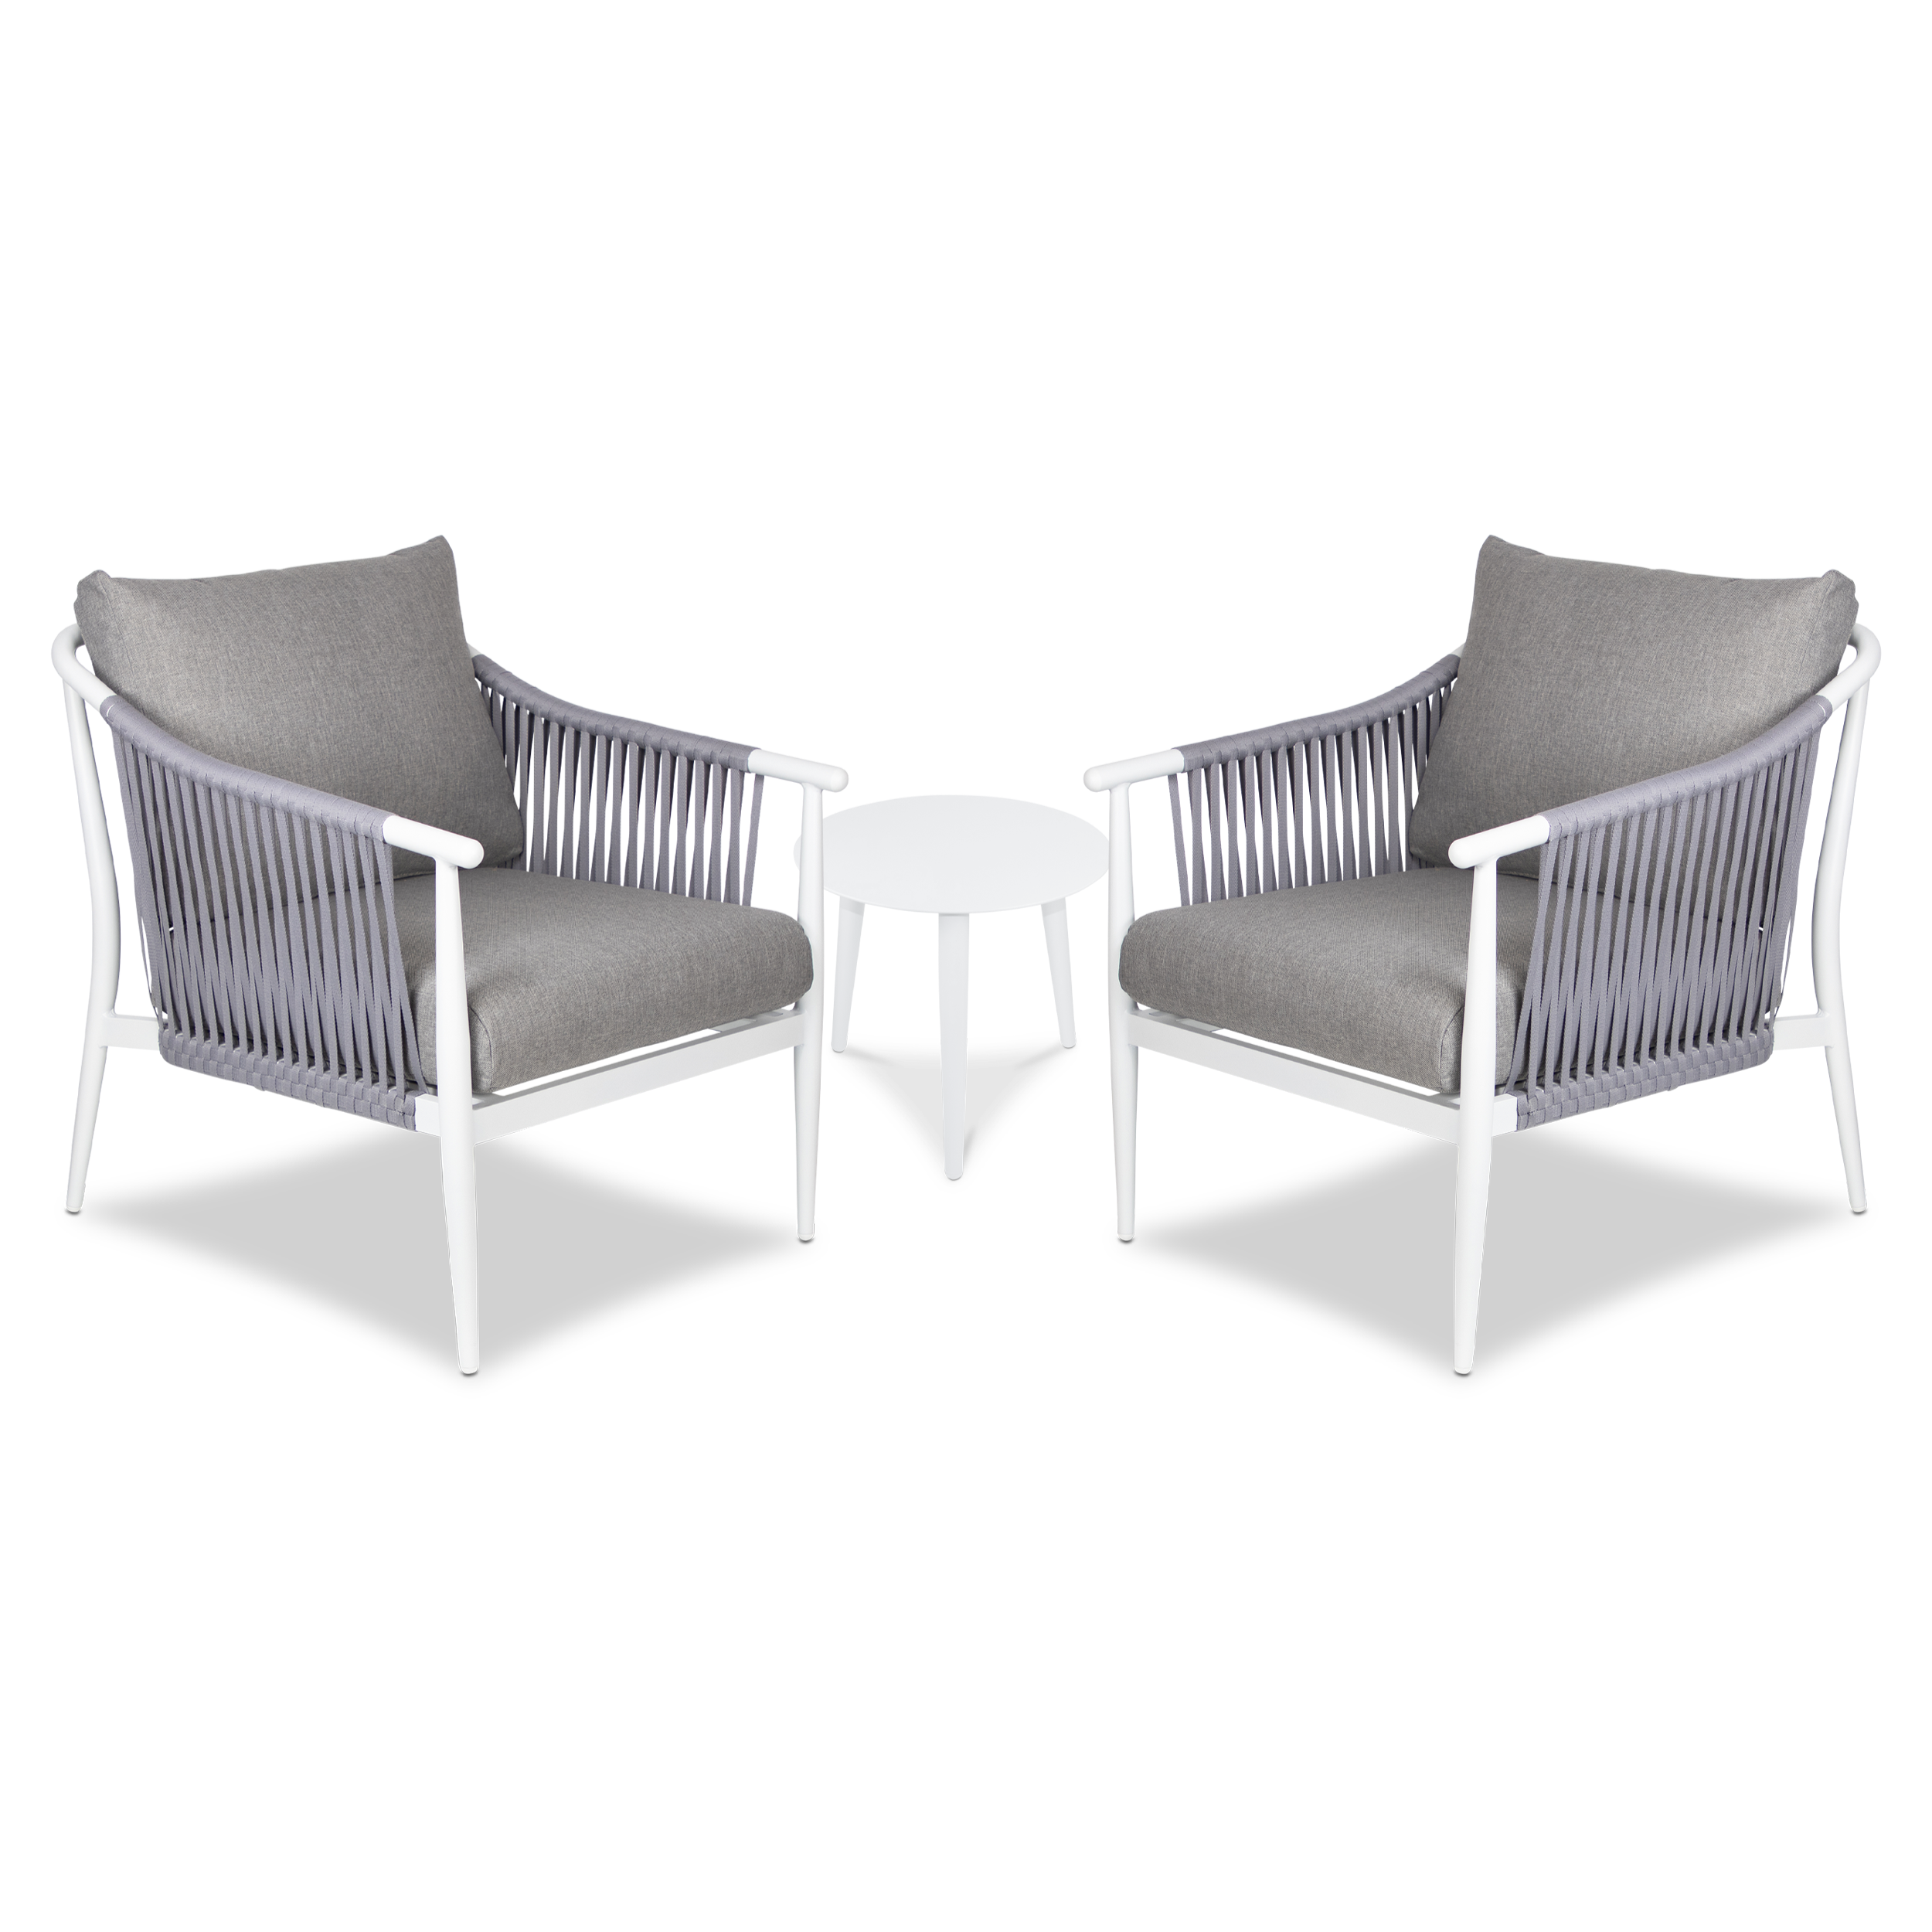 Marbella & Santorini Large 3pc Occasional Set in Arctic White with Sahara Olefin Cushions and Pewter Rope